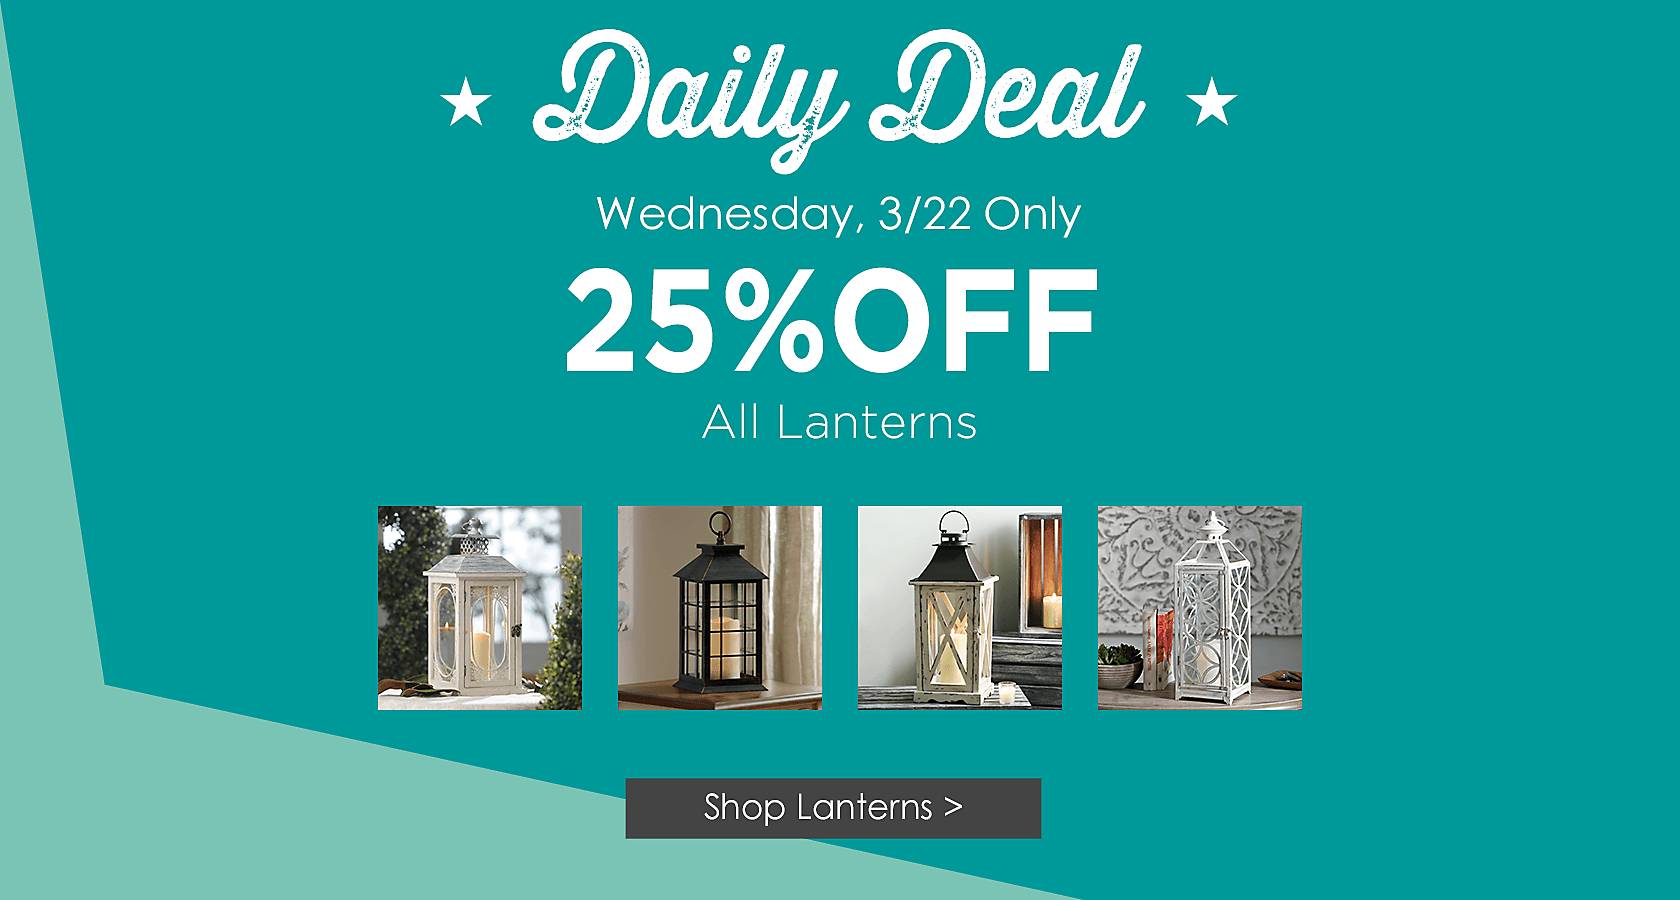 Daily Deal, Wednesday Only - 25% Off All Lanterns - Shop Now